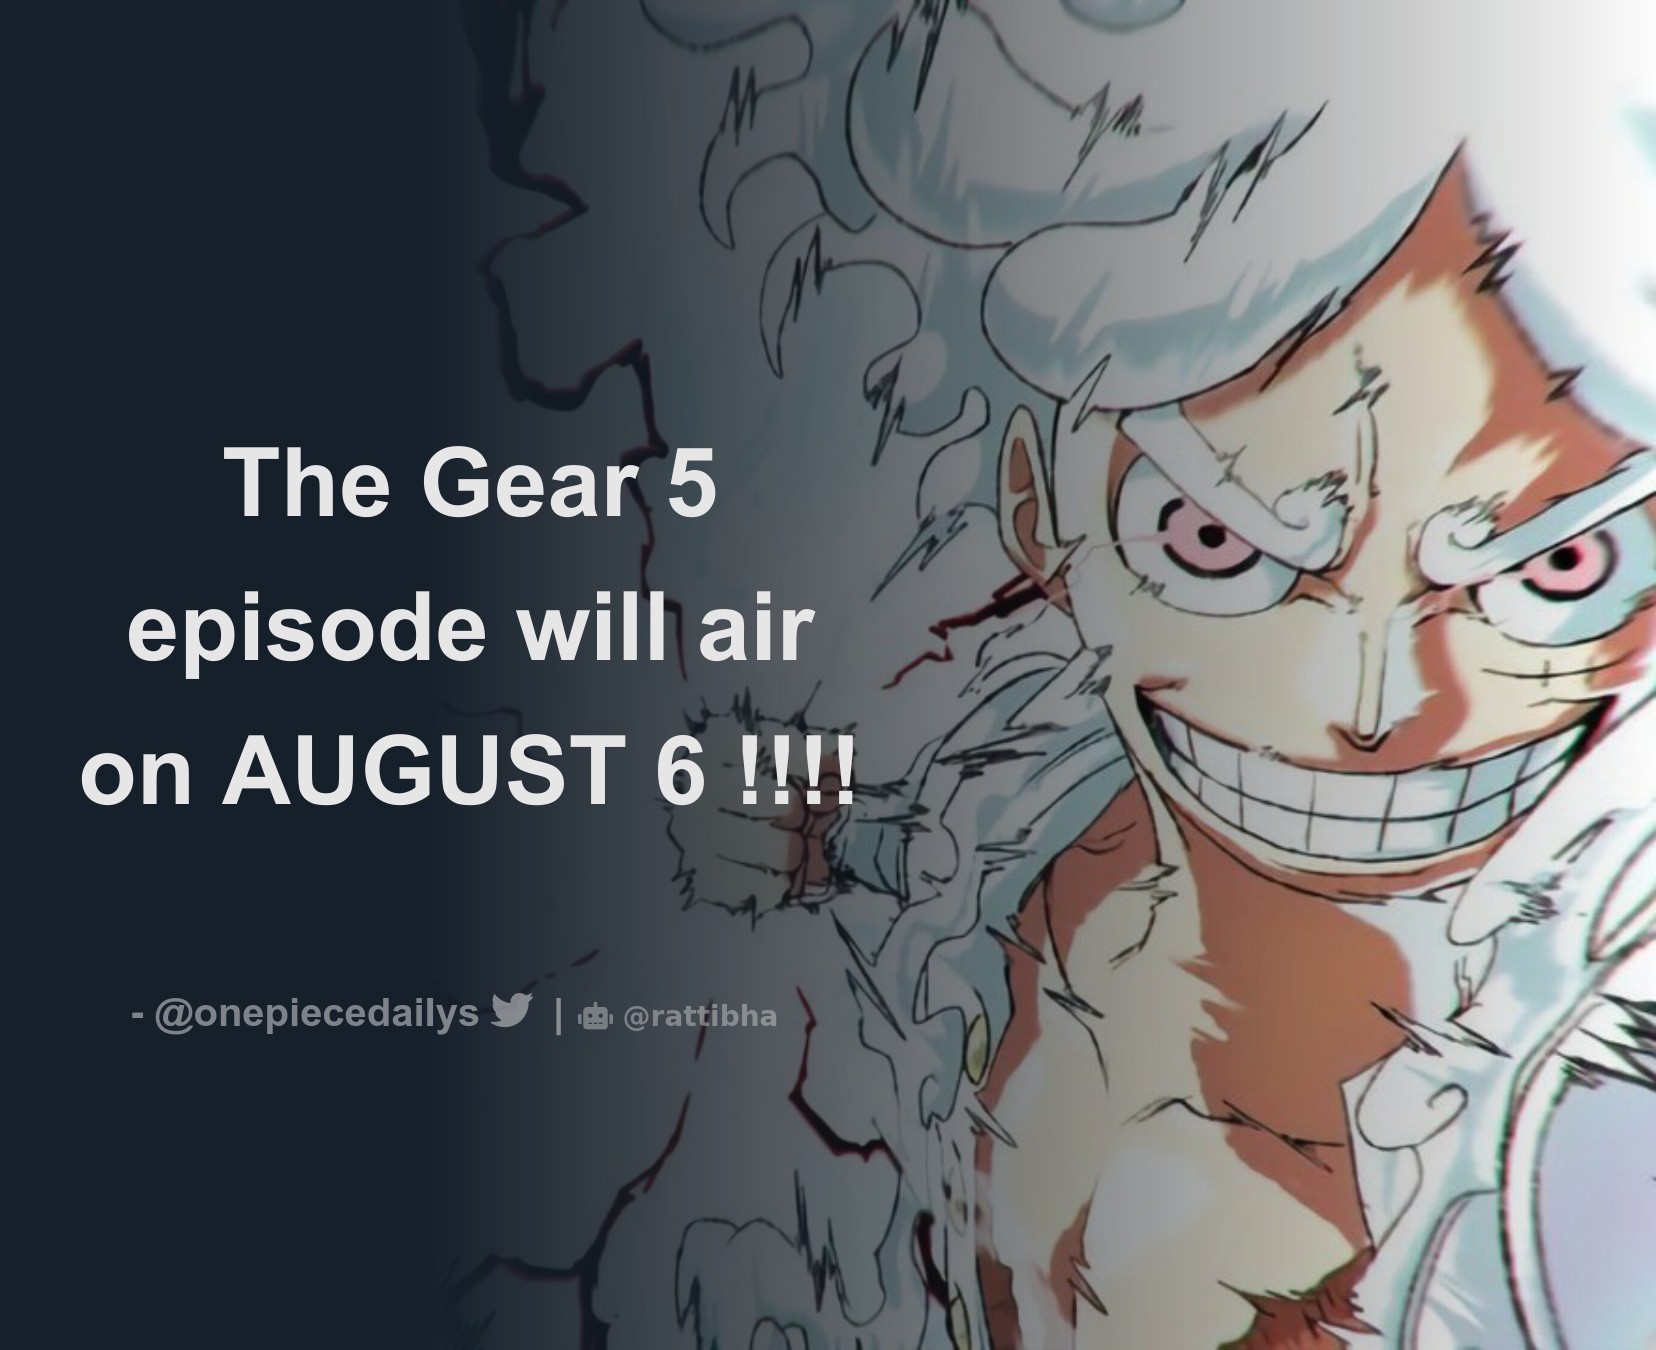 Is The Gear 5 Episode Out?